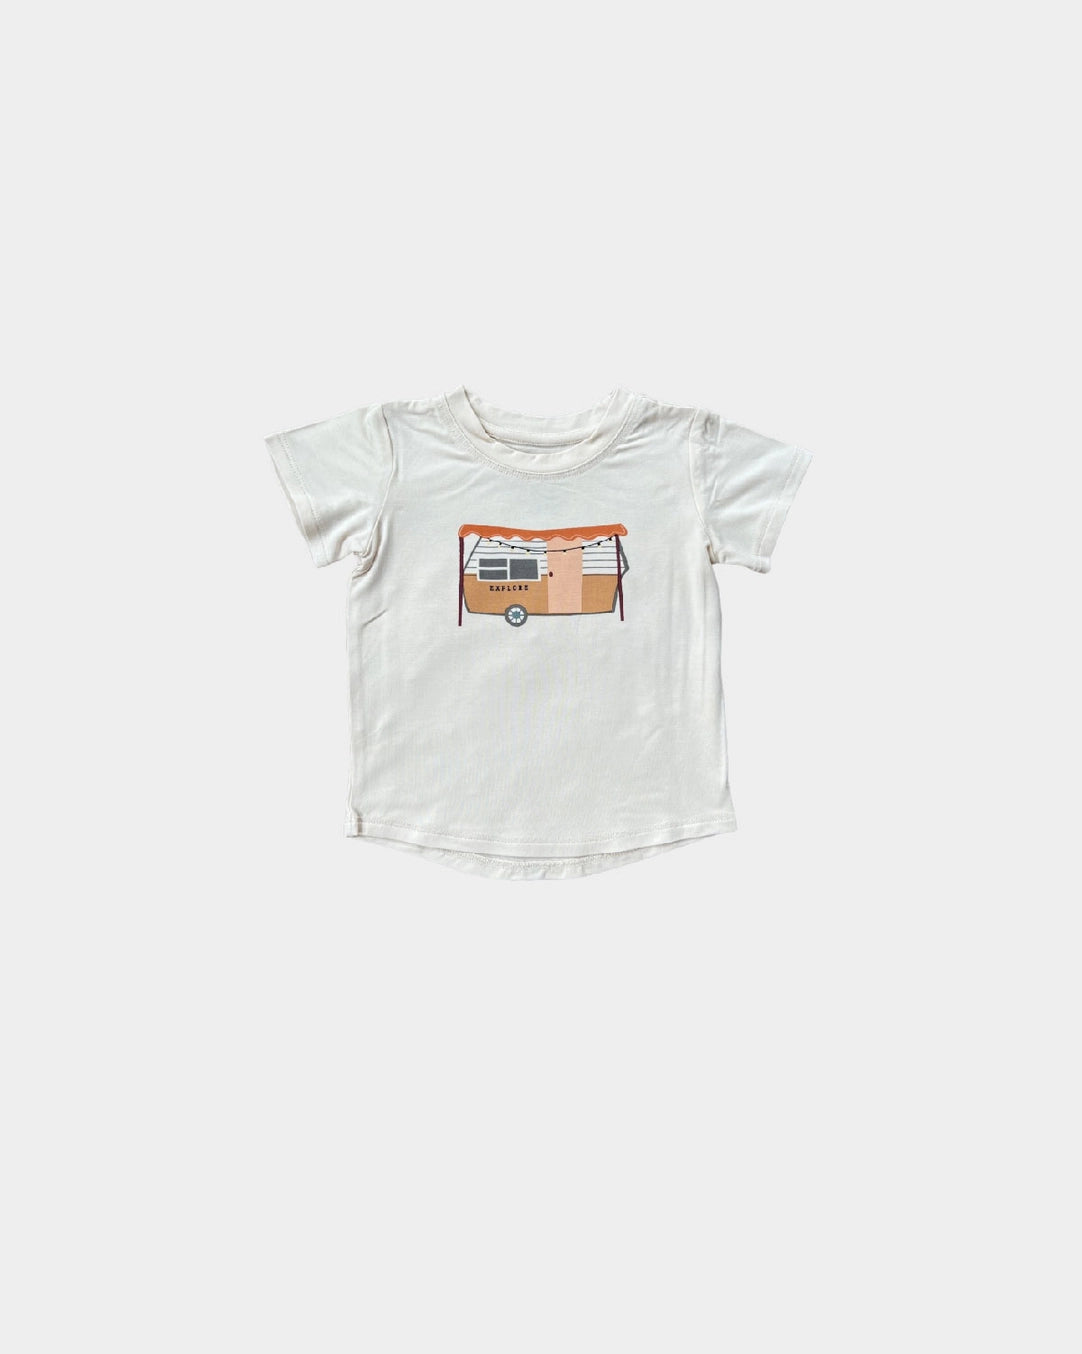 Babysprouts infant & kids RV tee